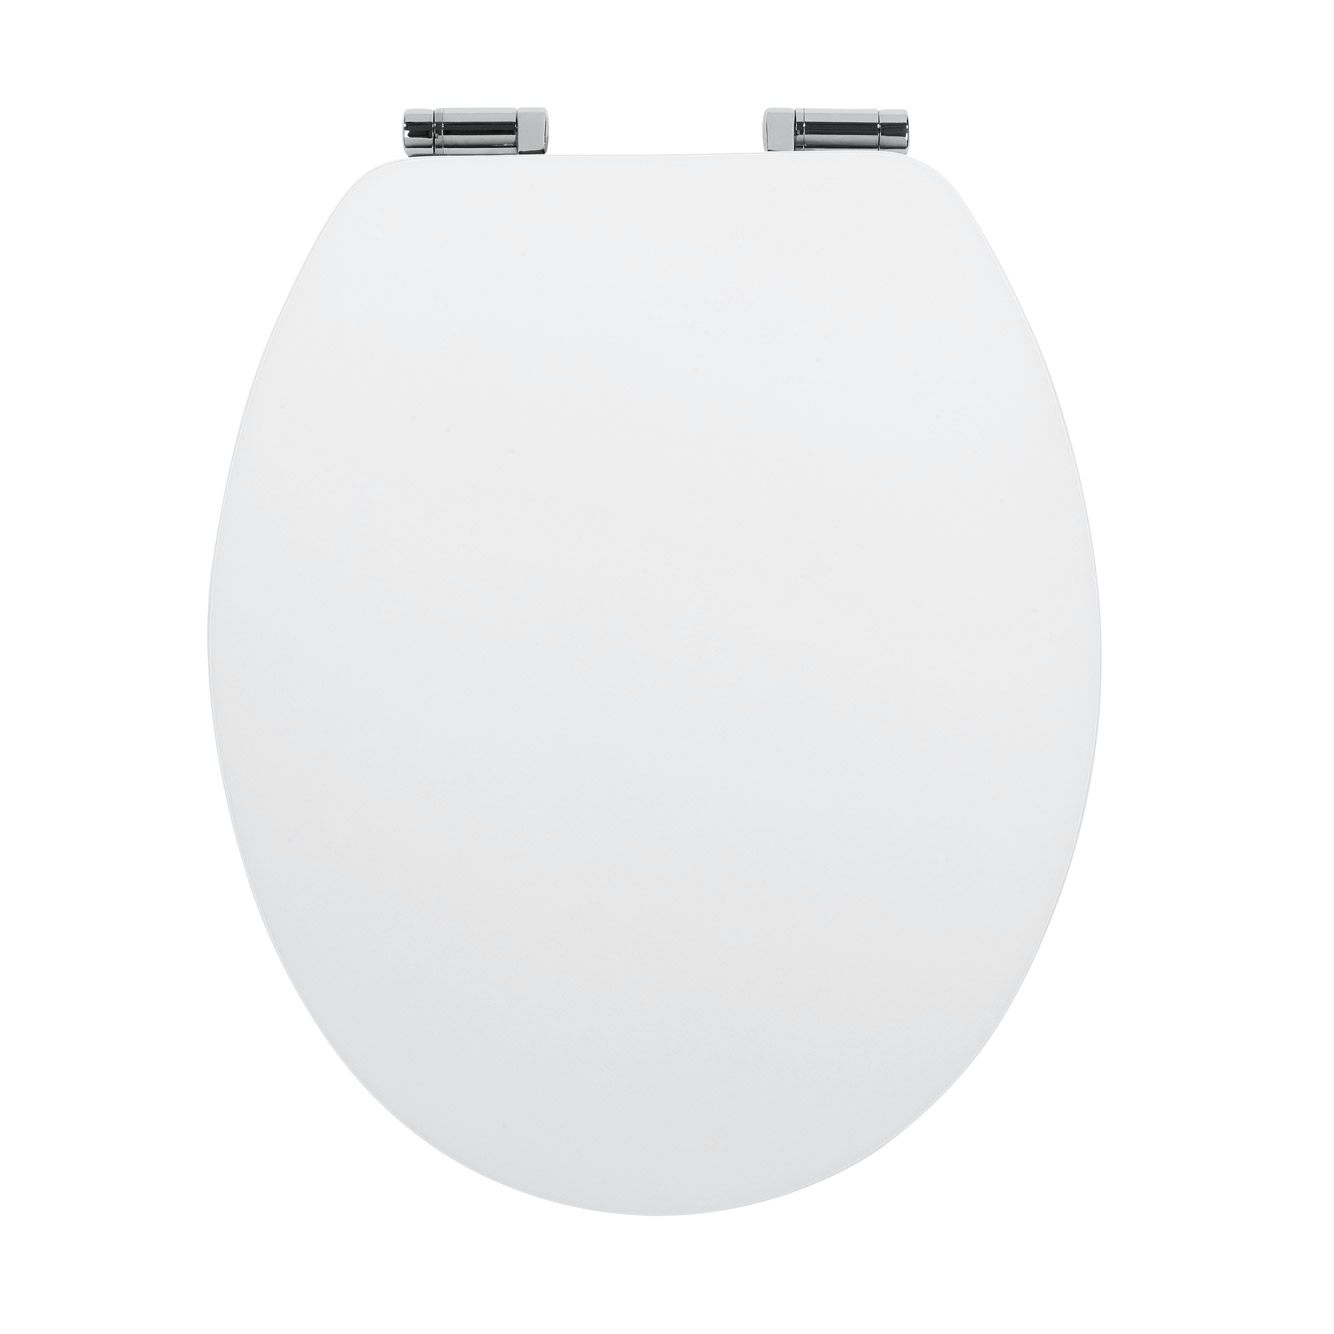 Celmac Wirquin luxury lacquered soft close wooden toilet seat